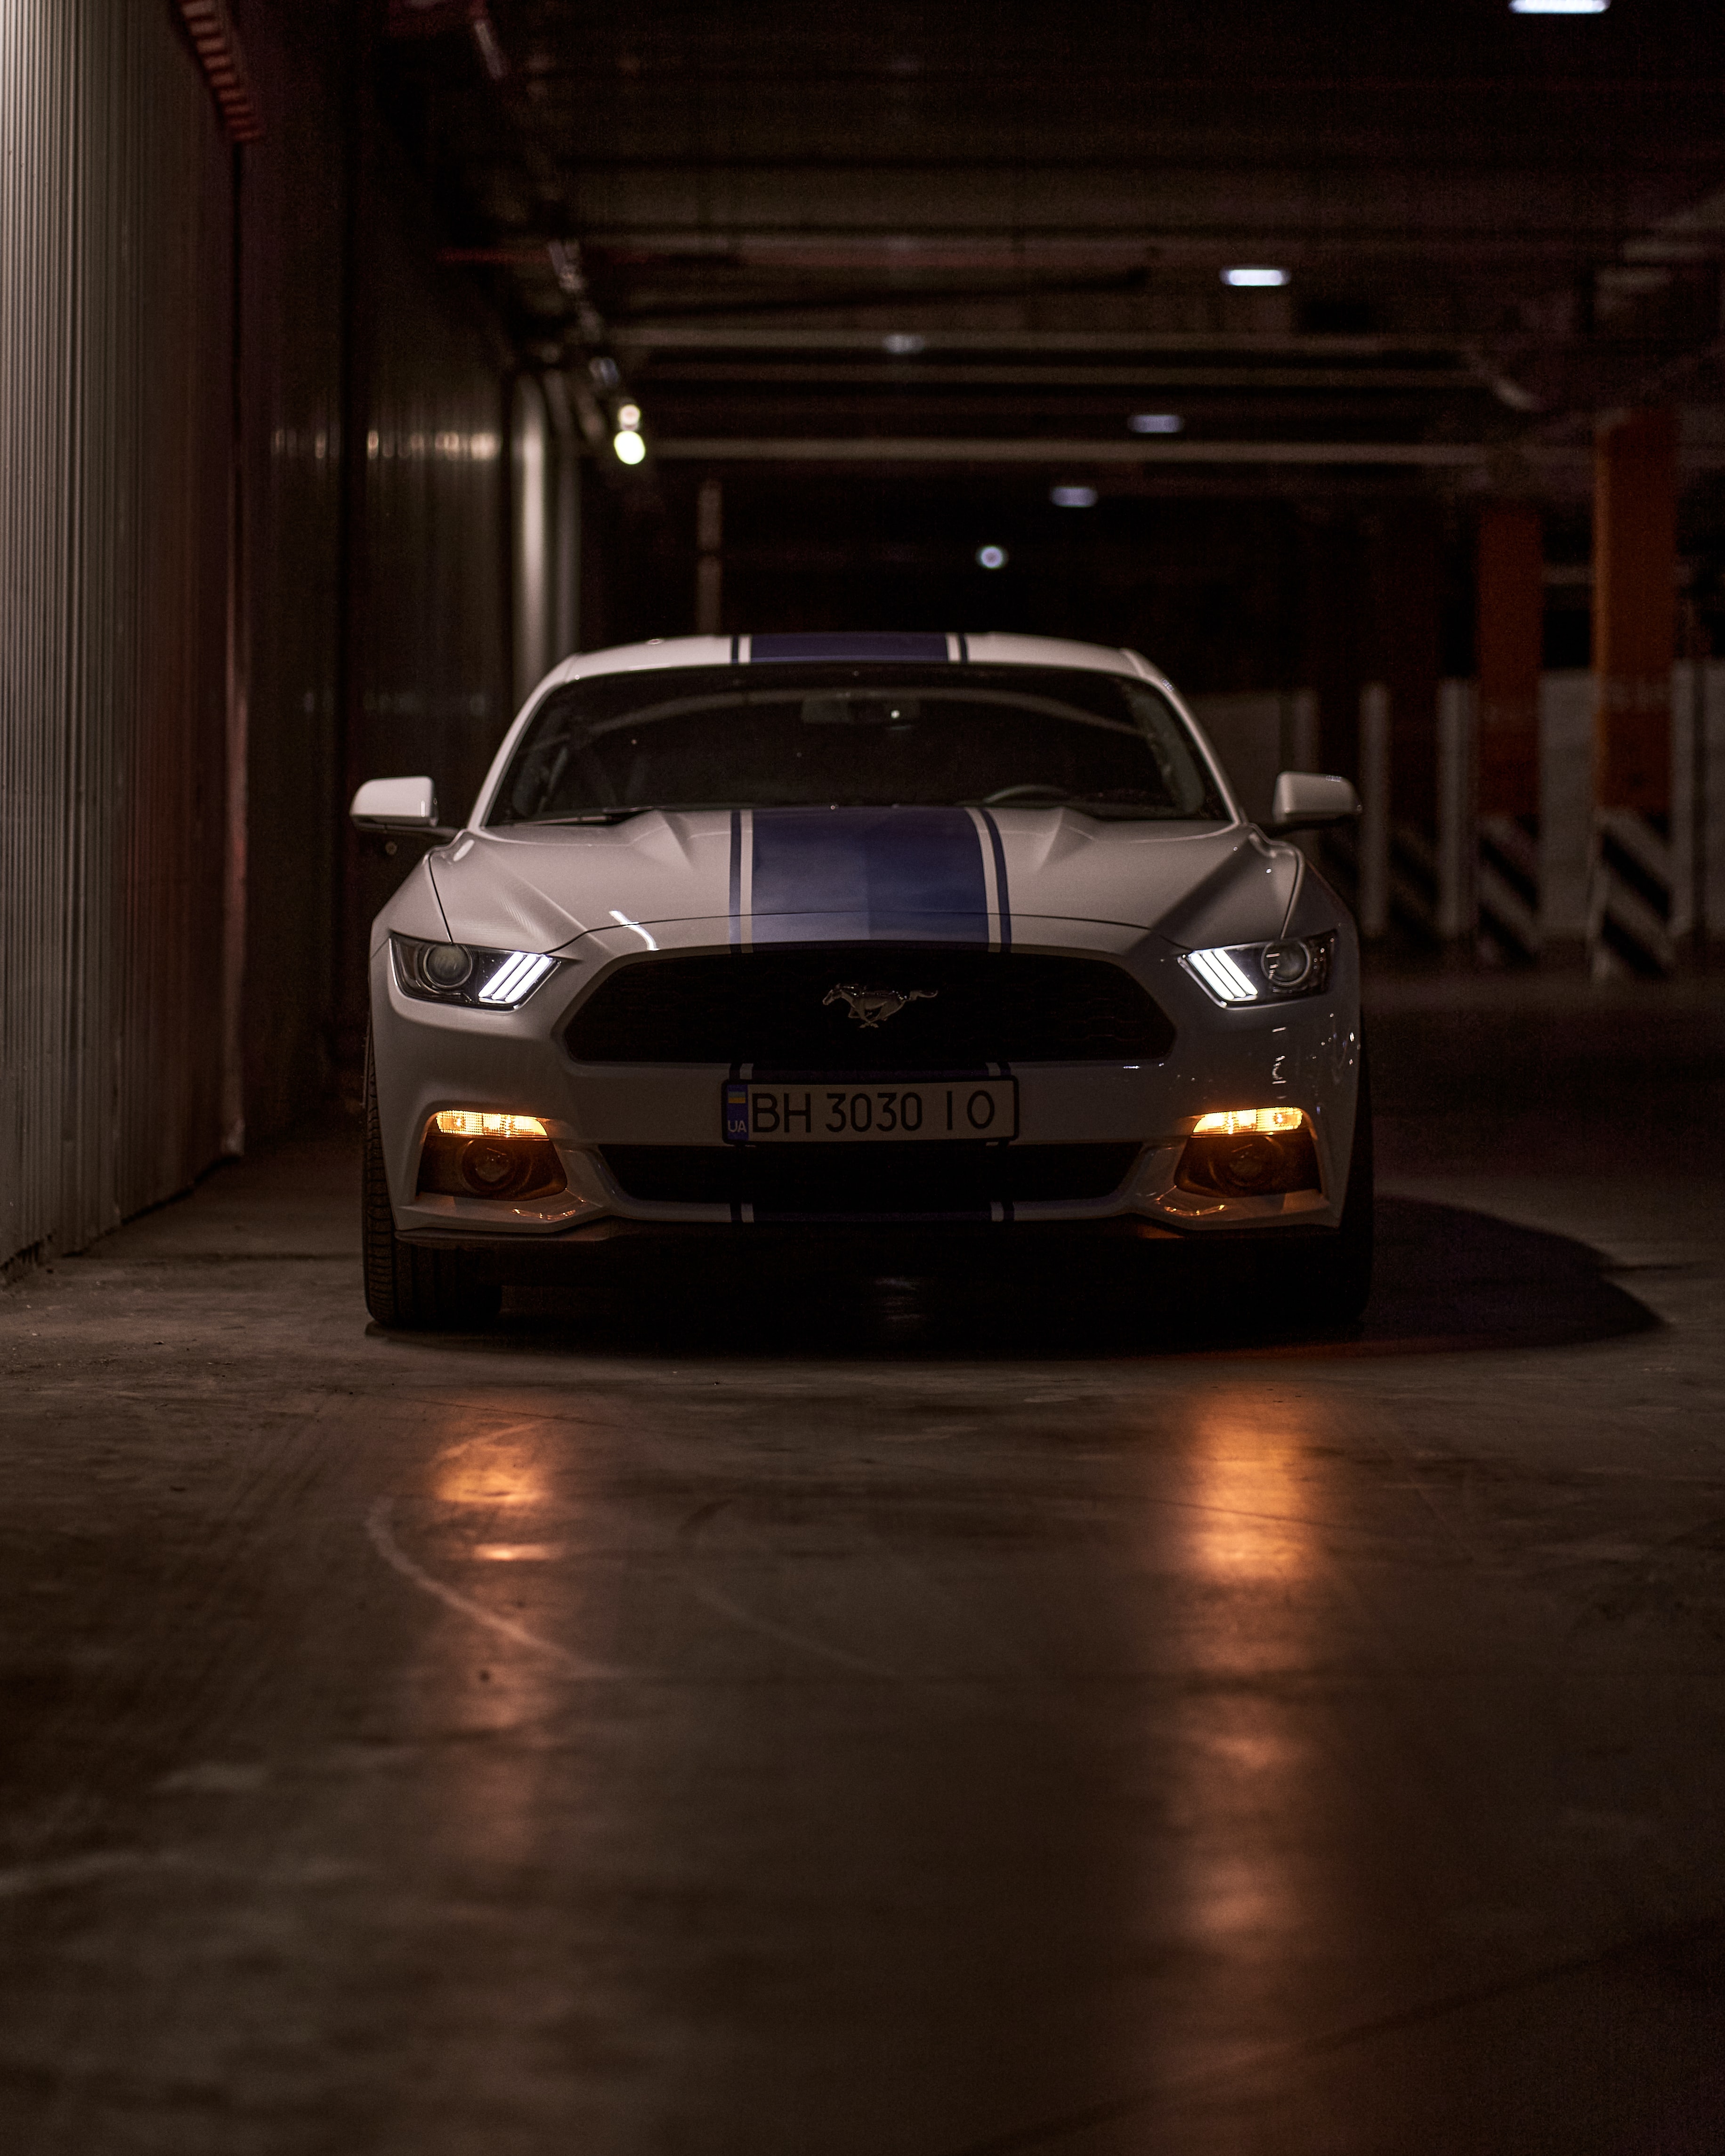 cars, mustang, car, front view, sports car, mustang gt, lights, headlights, sports